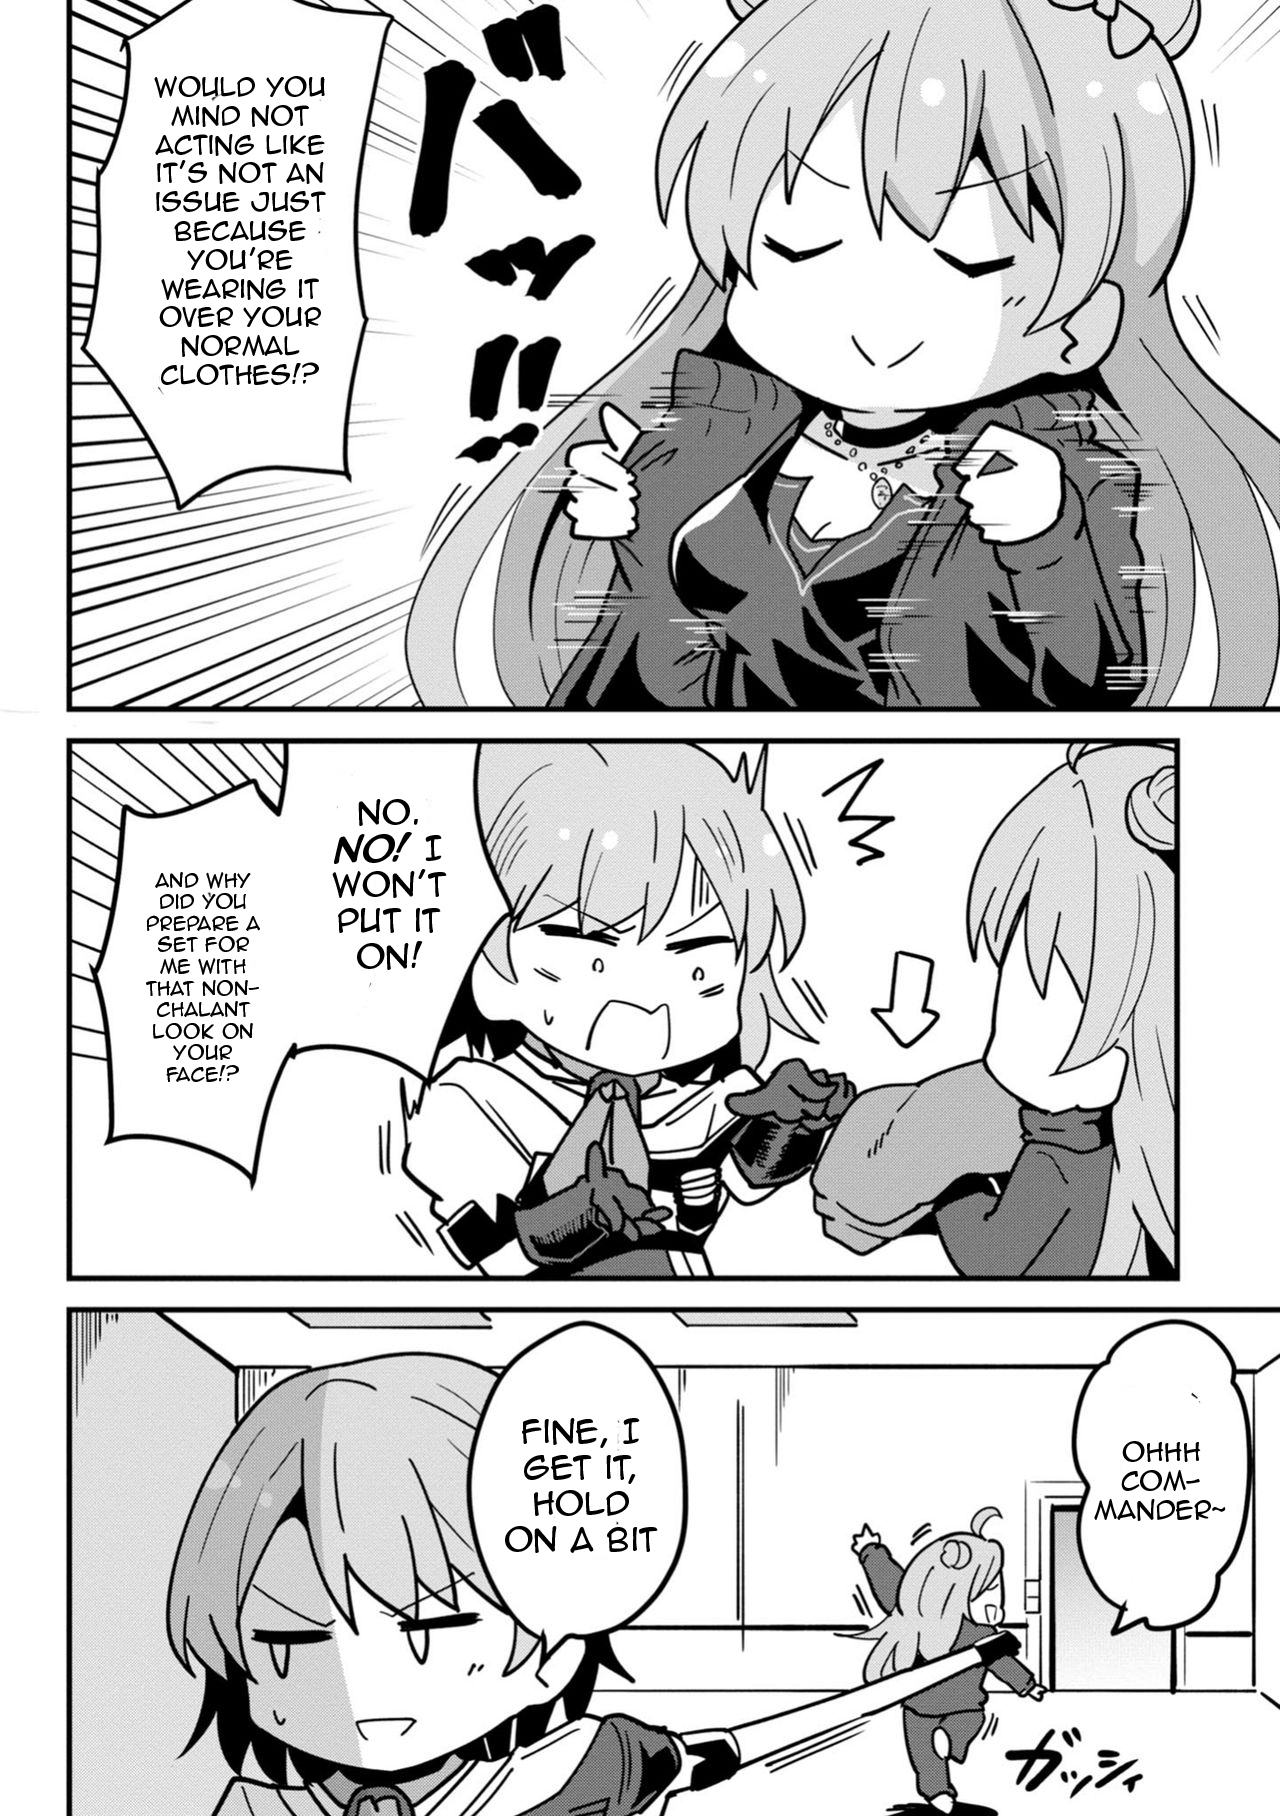 Dolls Frontline Comic anthology Vol. 1 Ch. 12 A Day In The Life Of Adjutant Vector